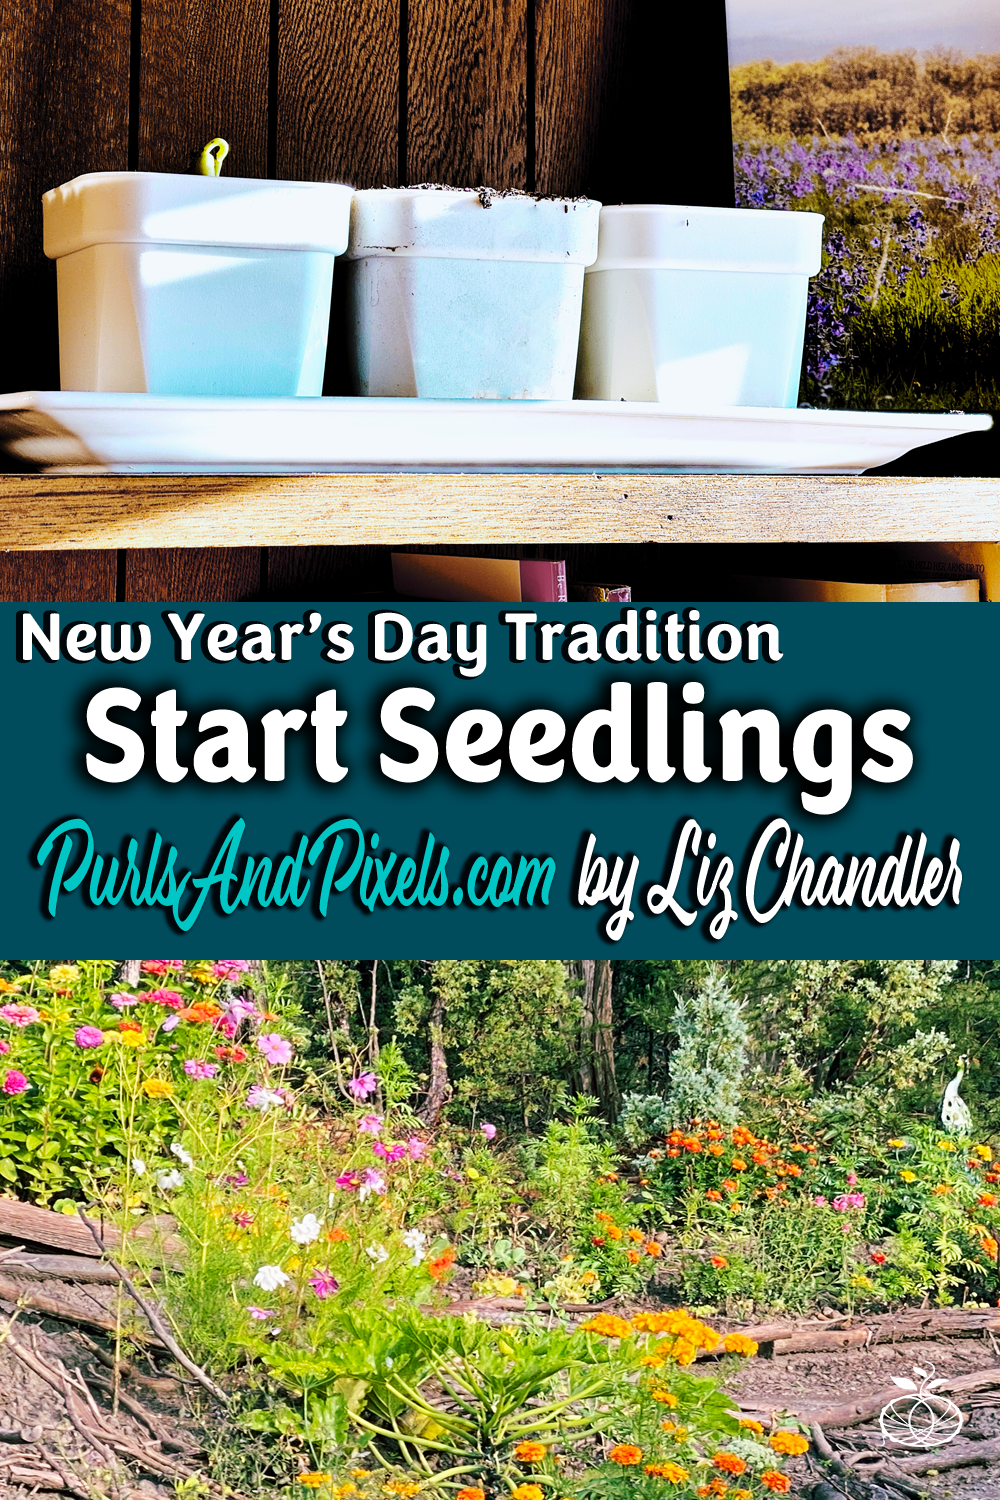 Starting Seedlings on New Year’s Day